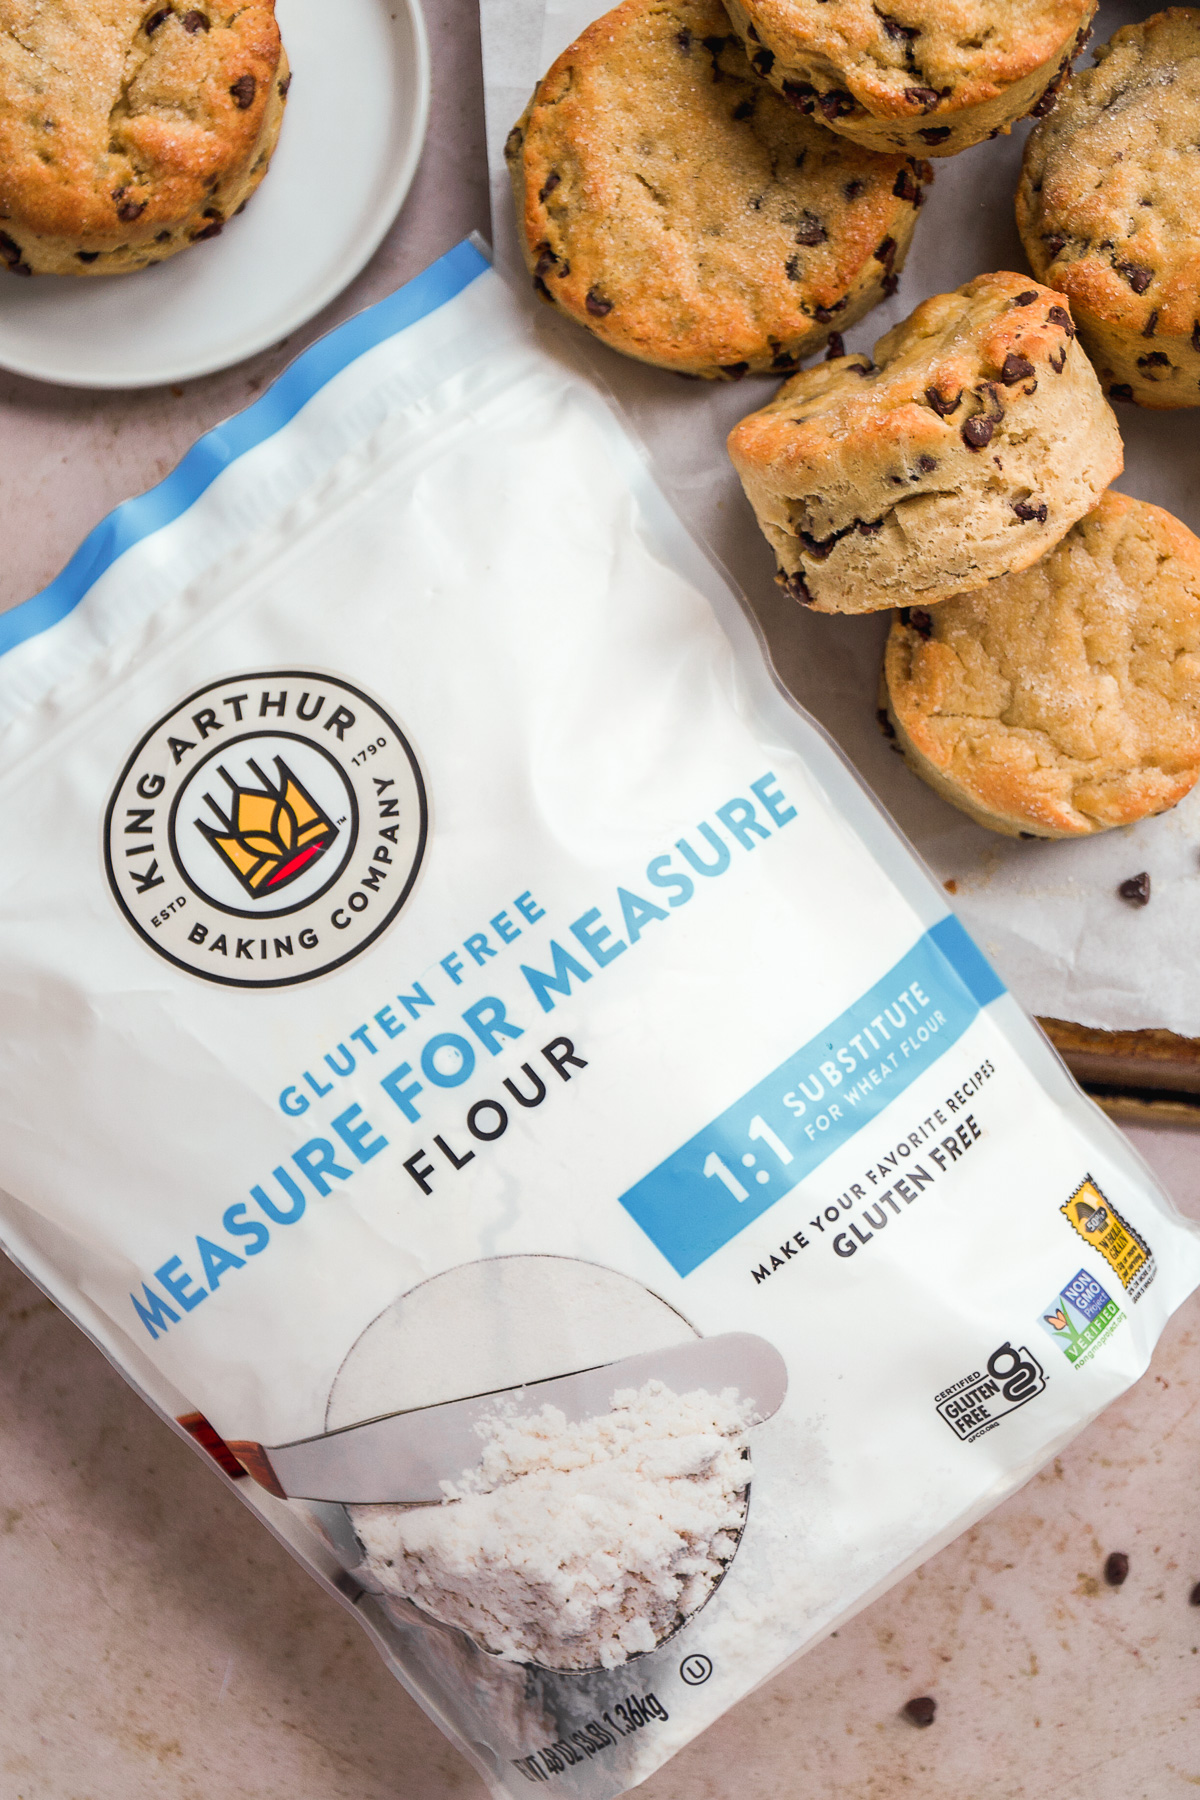 Bag of gluten free flour laying next to chocolate chip biscuits.